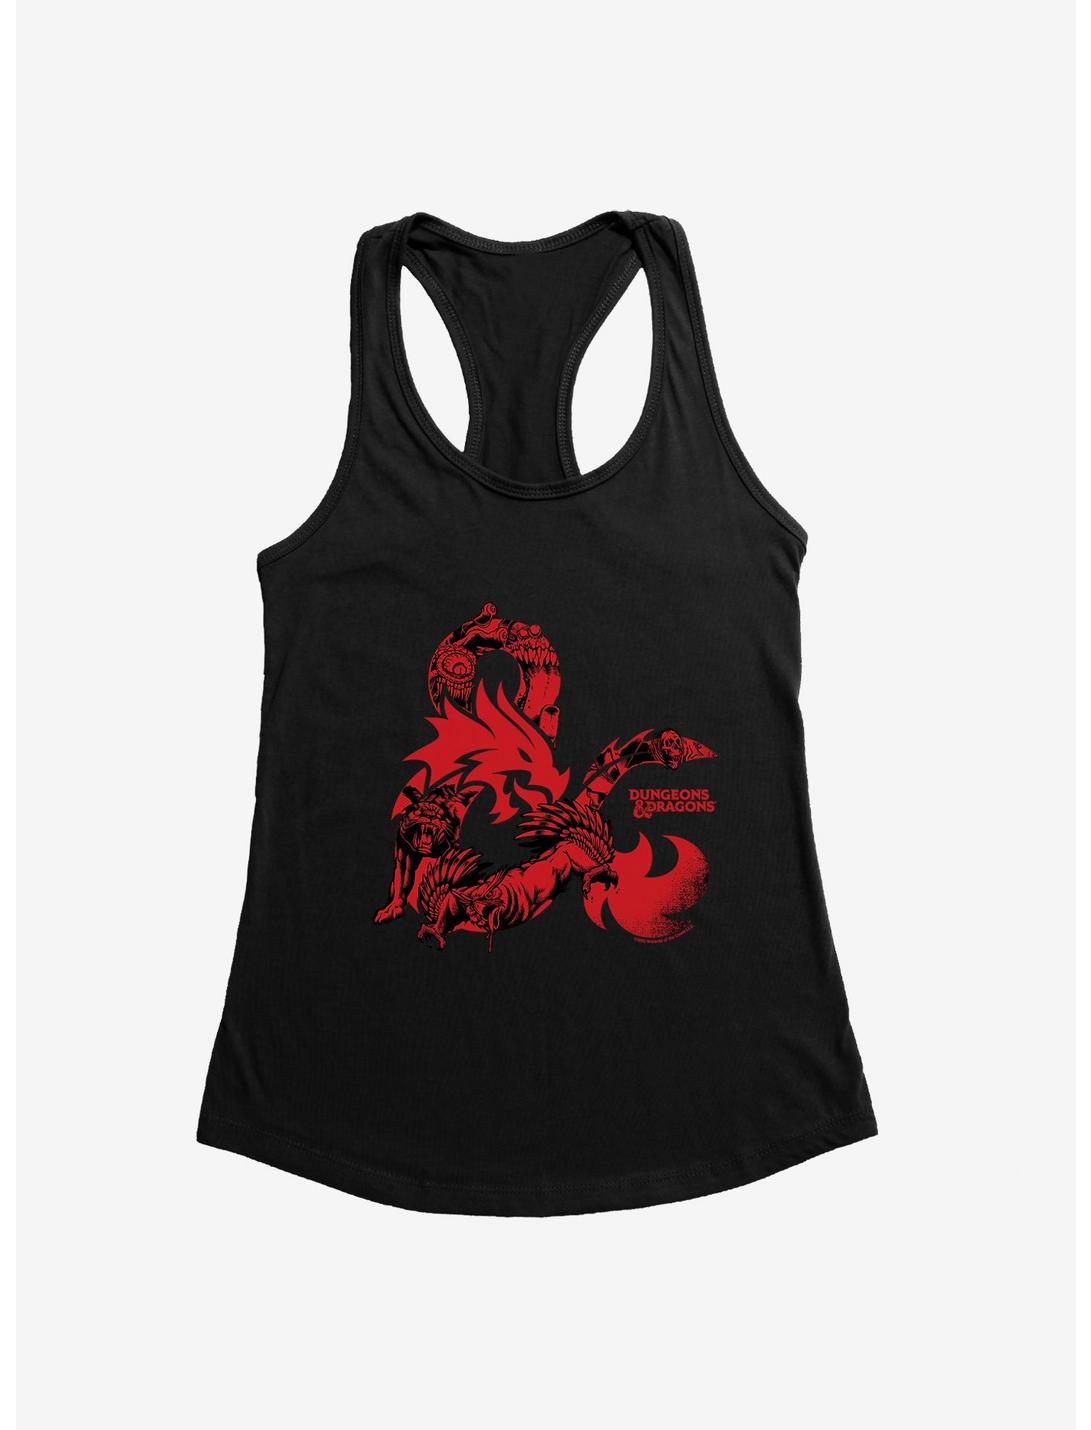 Dungeons & Dragons Red Ampersand Womens Tank Top, BLACK, hi-res